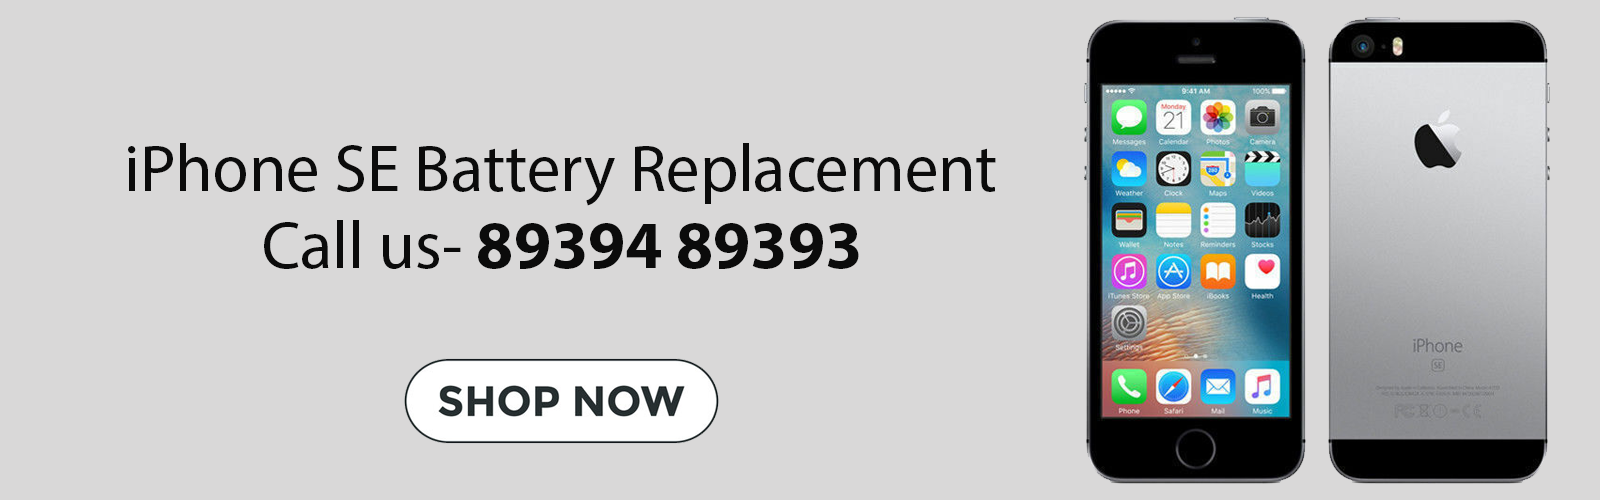 iPhone SE Battery Replacement Price Chennai